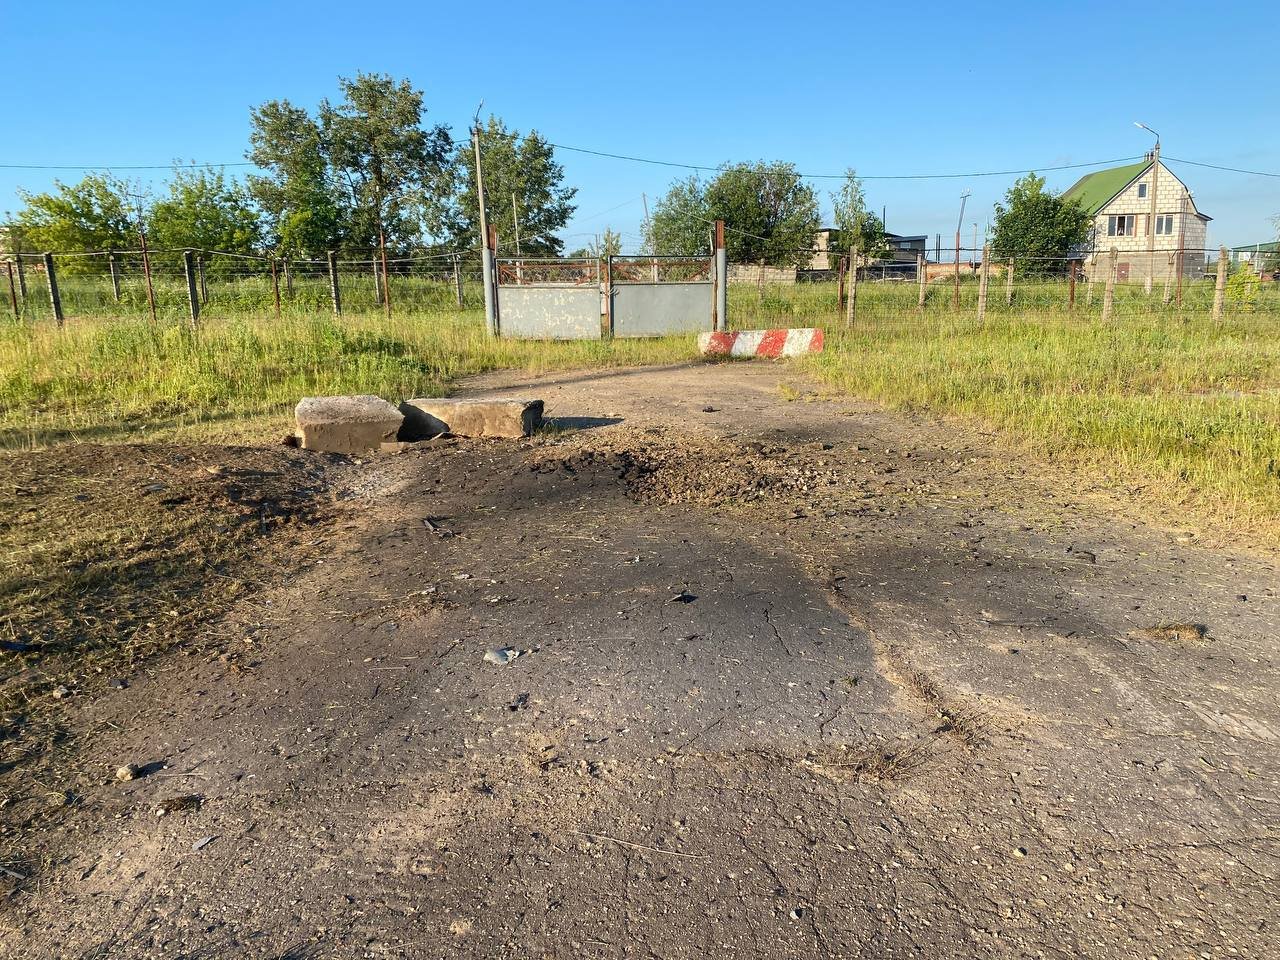 The alleged remains of drones brought down in the Naro-Fominskiy urban district in the village of Kalininets, Russia, on June 21.